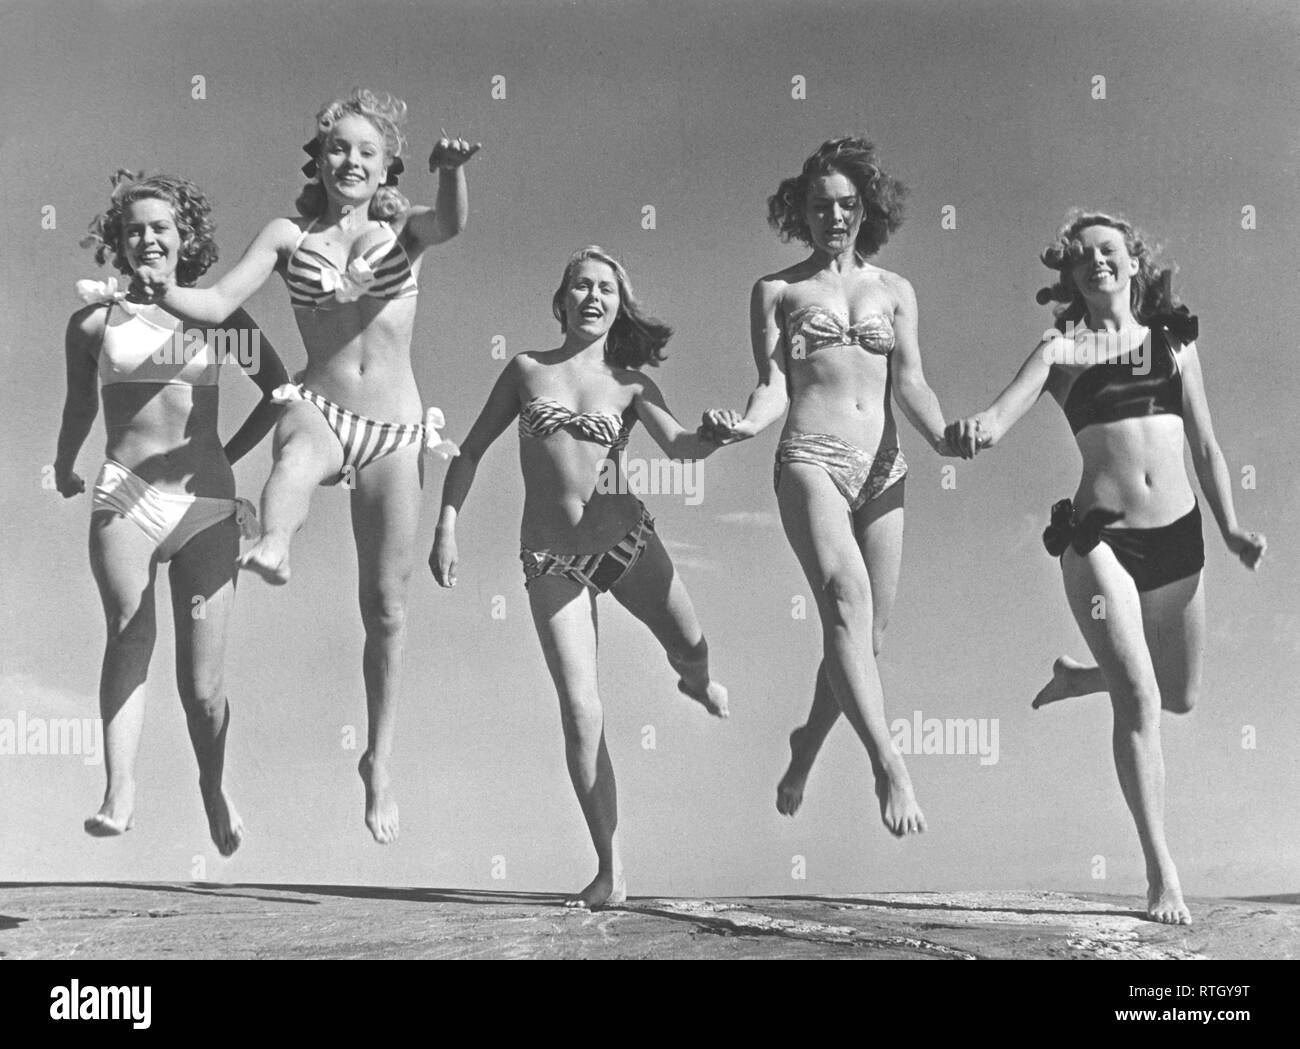 1940s summer. A group of young women in their bikinis are happy on this summer's day, jumping of joy. From left: Marianne Molander, Marianne Ljunggren, Eva Jönsson, Gunnel Wadner och Haide göransson. Photo Kristoffersson Ref AD26. Sweden 1947. Stock Photo